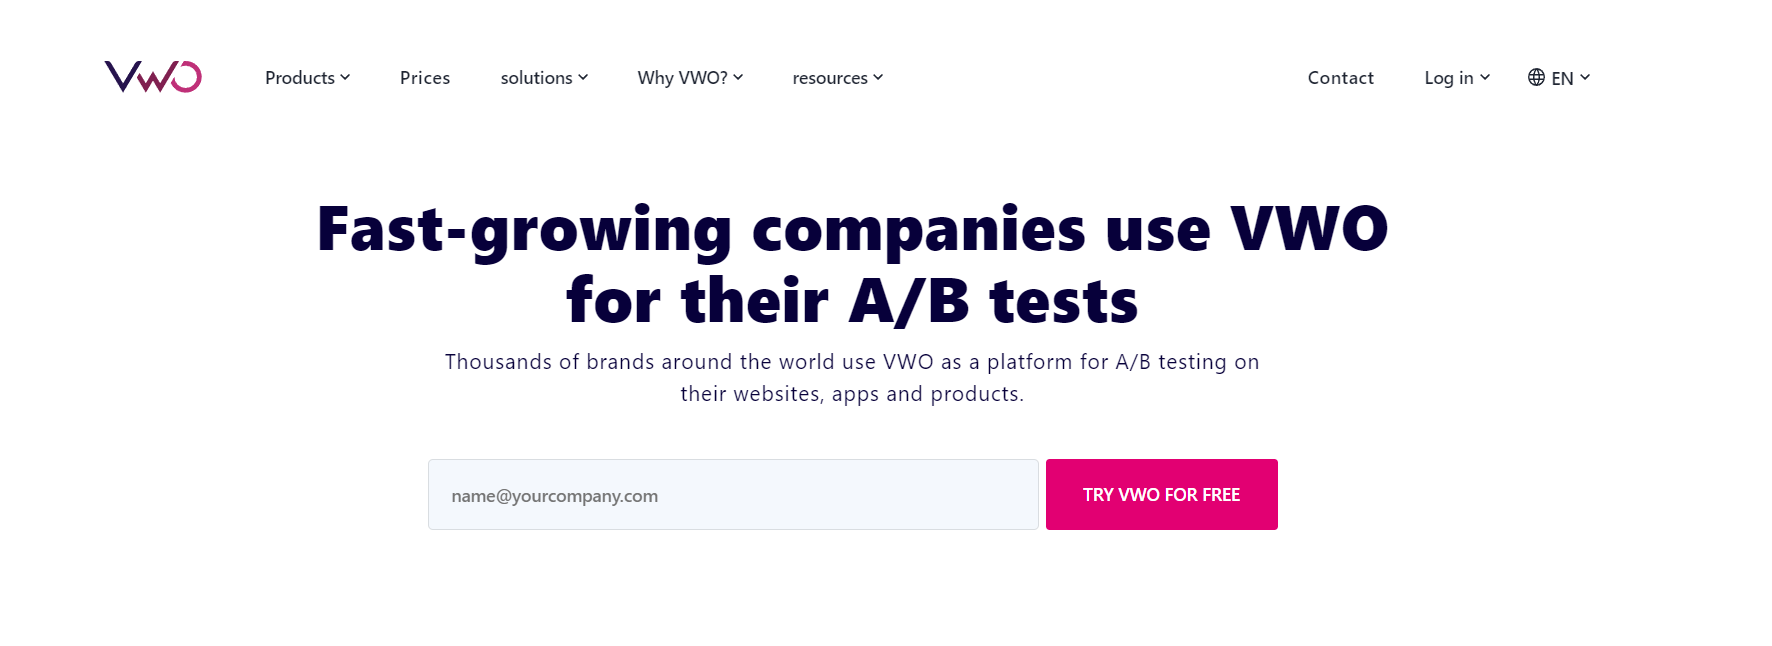 vwo testing for conversion rate optimization